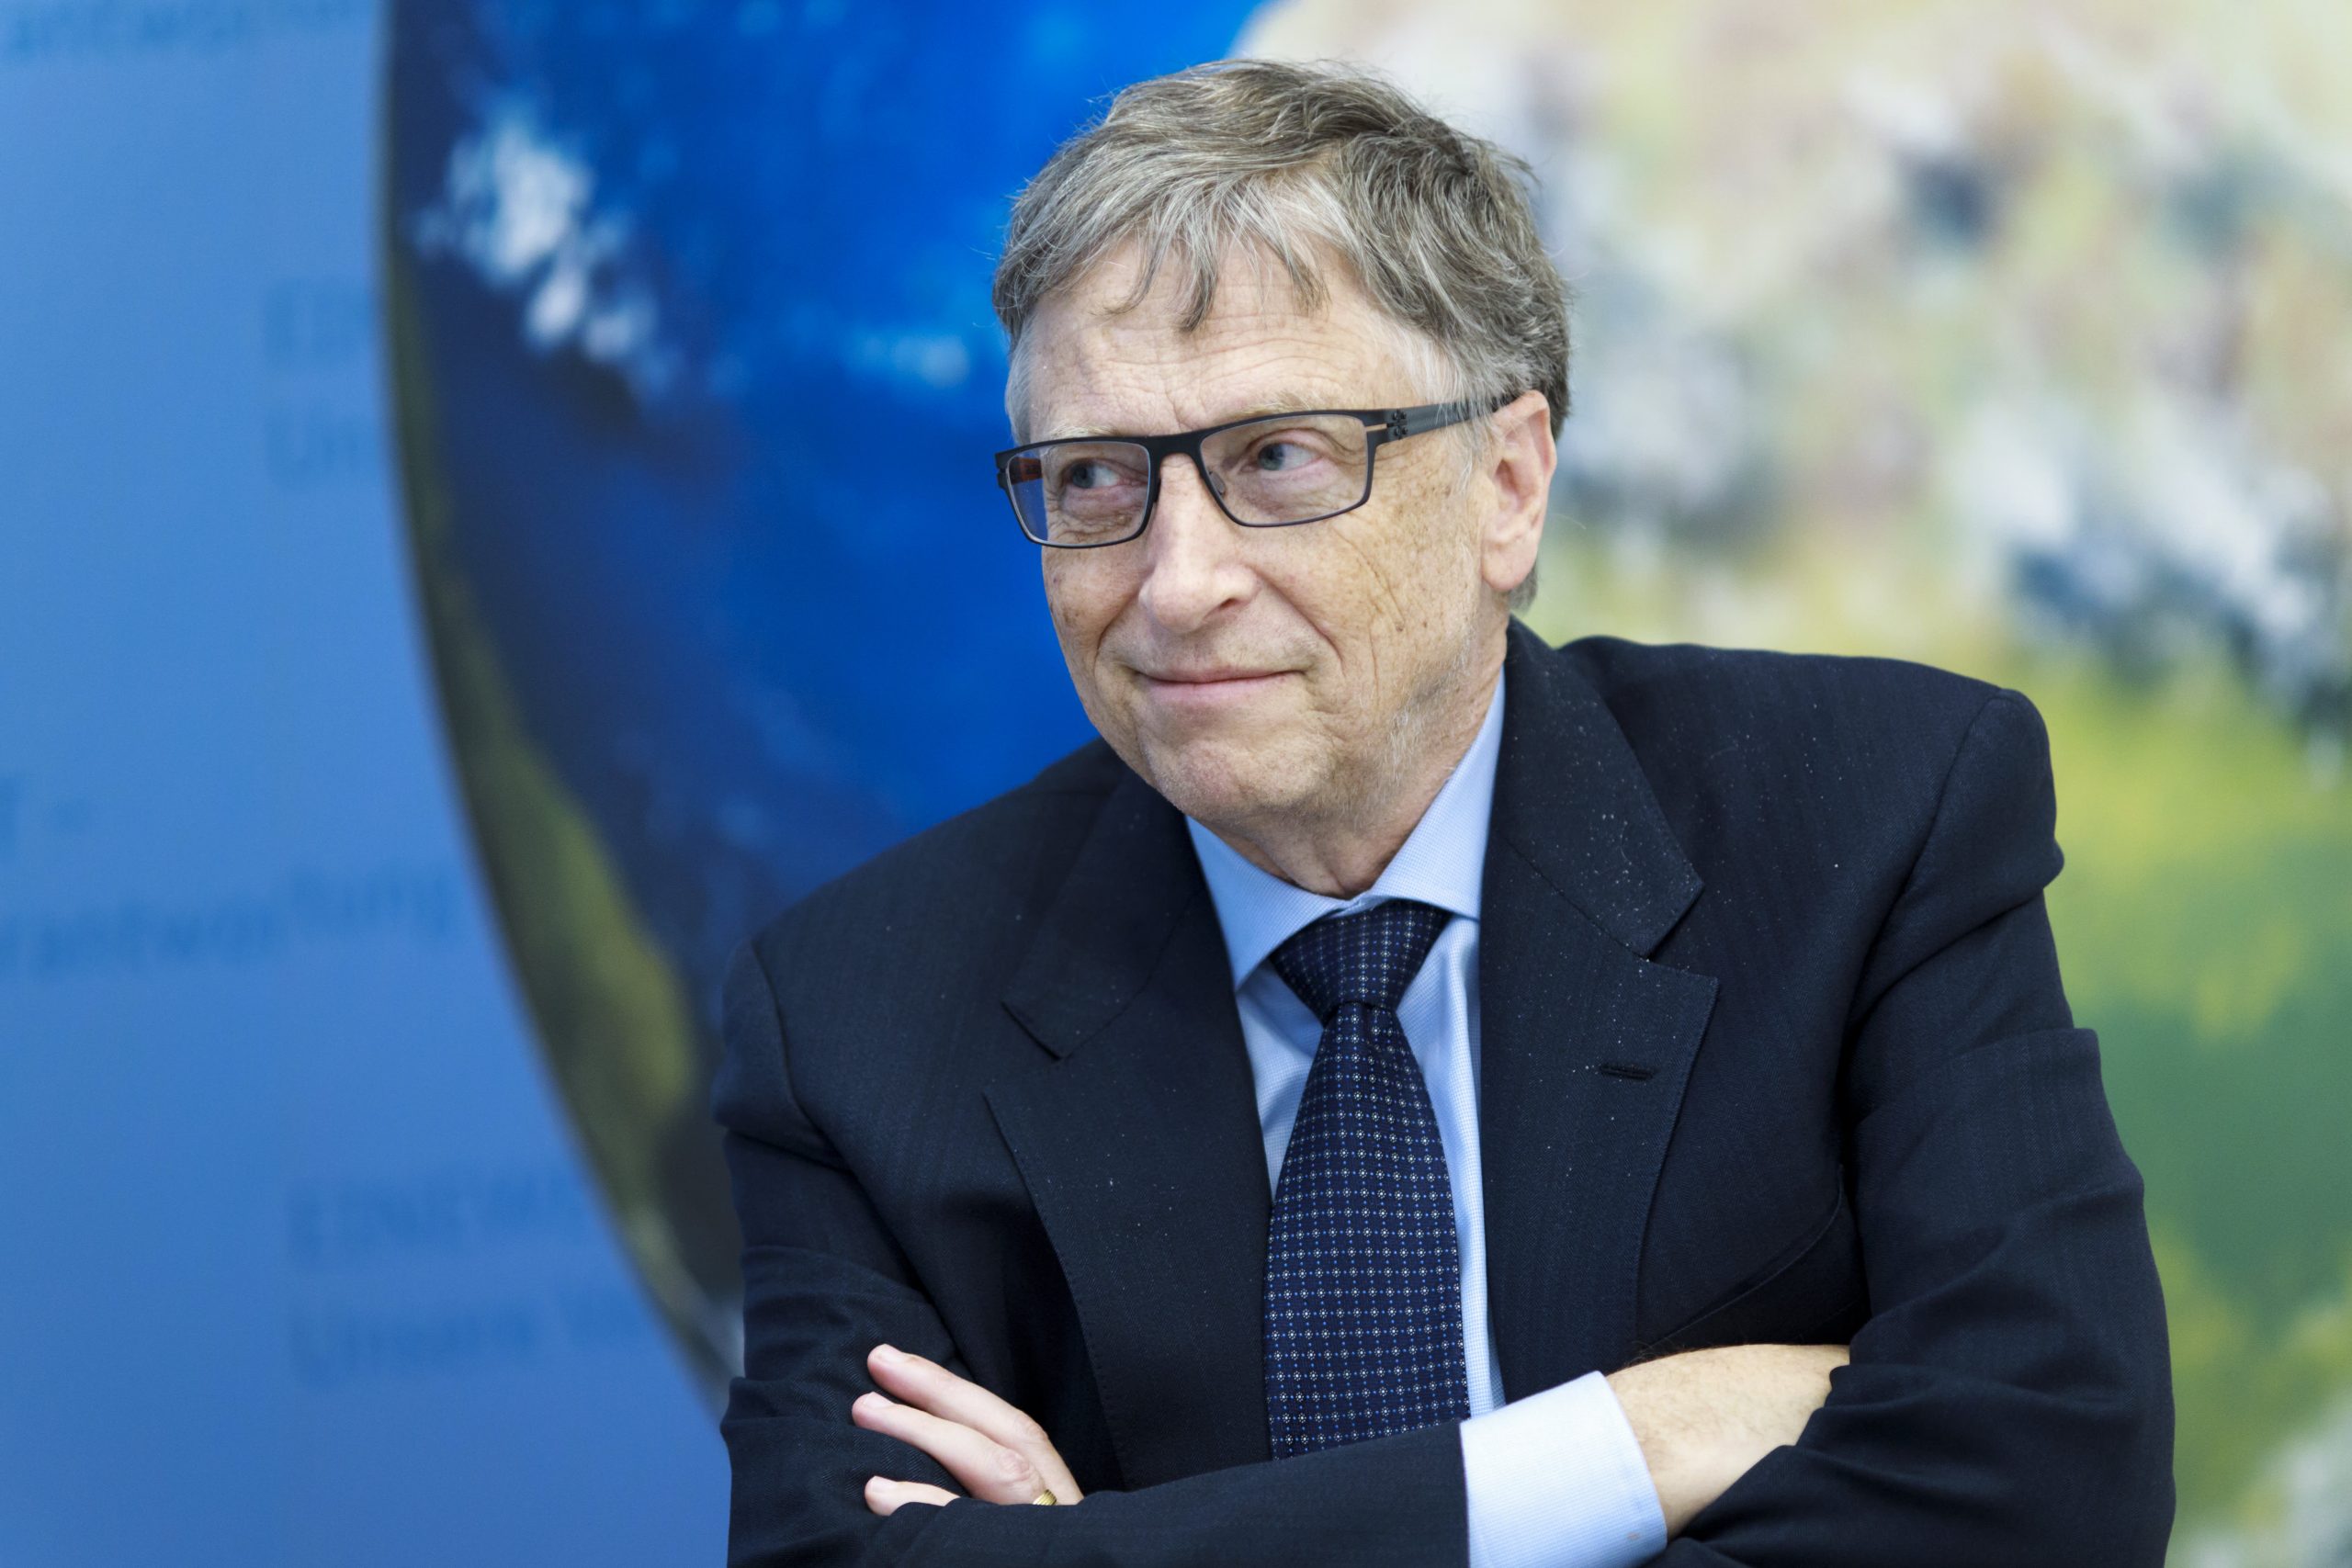 Bill Gates says bioterrorism and climate change are the next biggest threats after pandemic